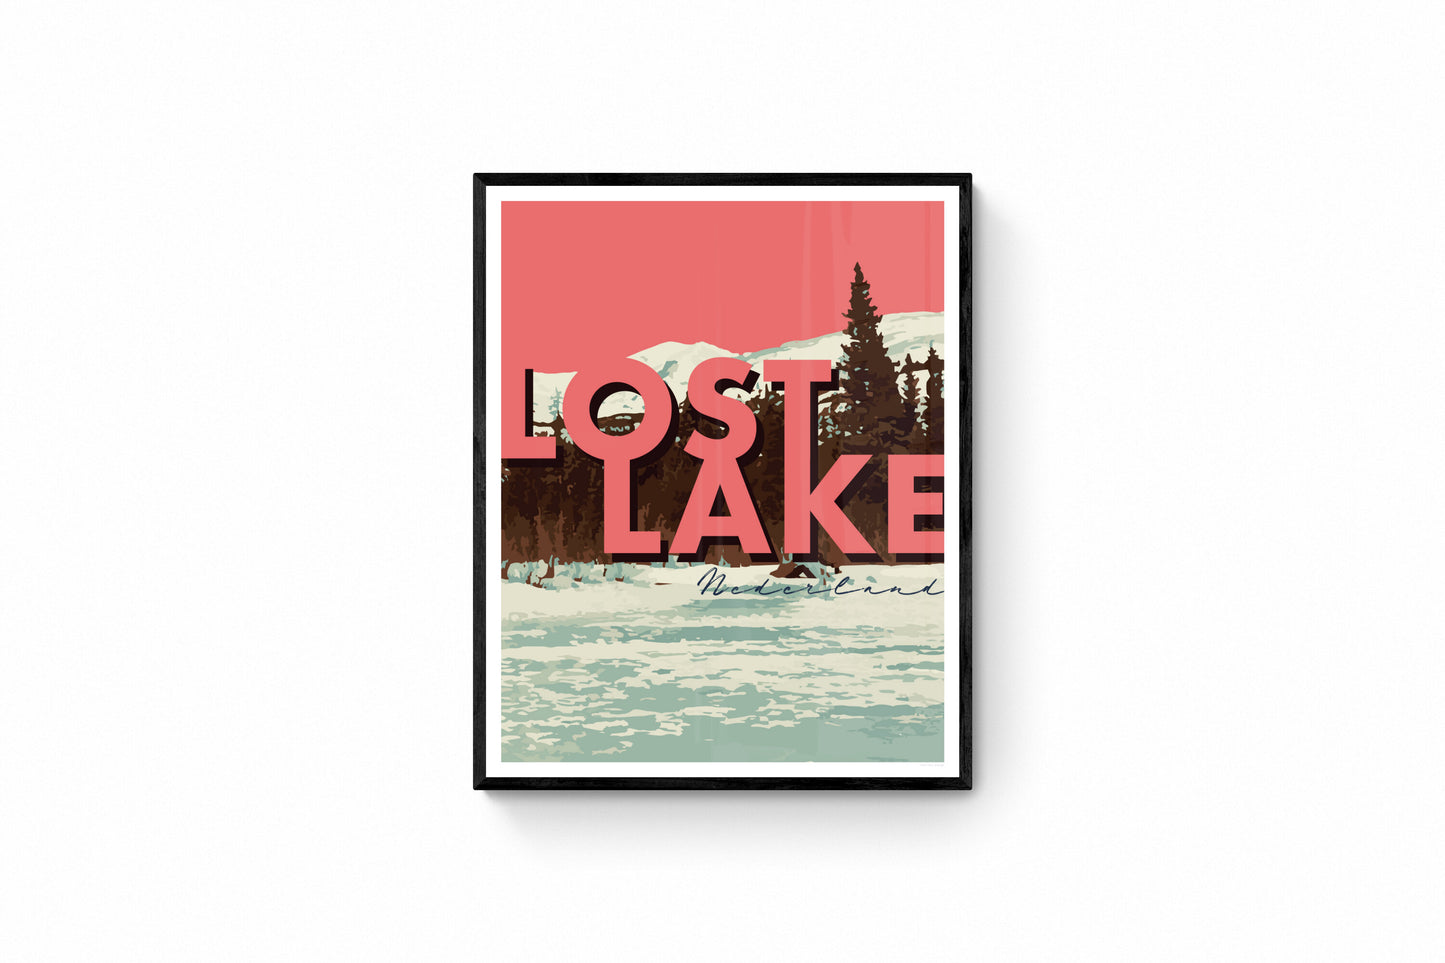 Nederland, Colorado - Lost Lake, Wall Art w/ Large Text, Print Only (No Frame)